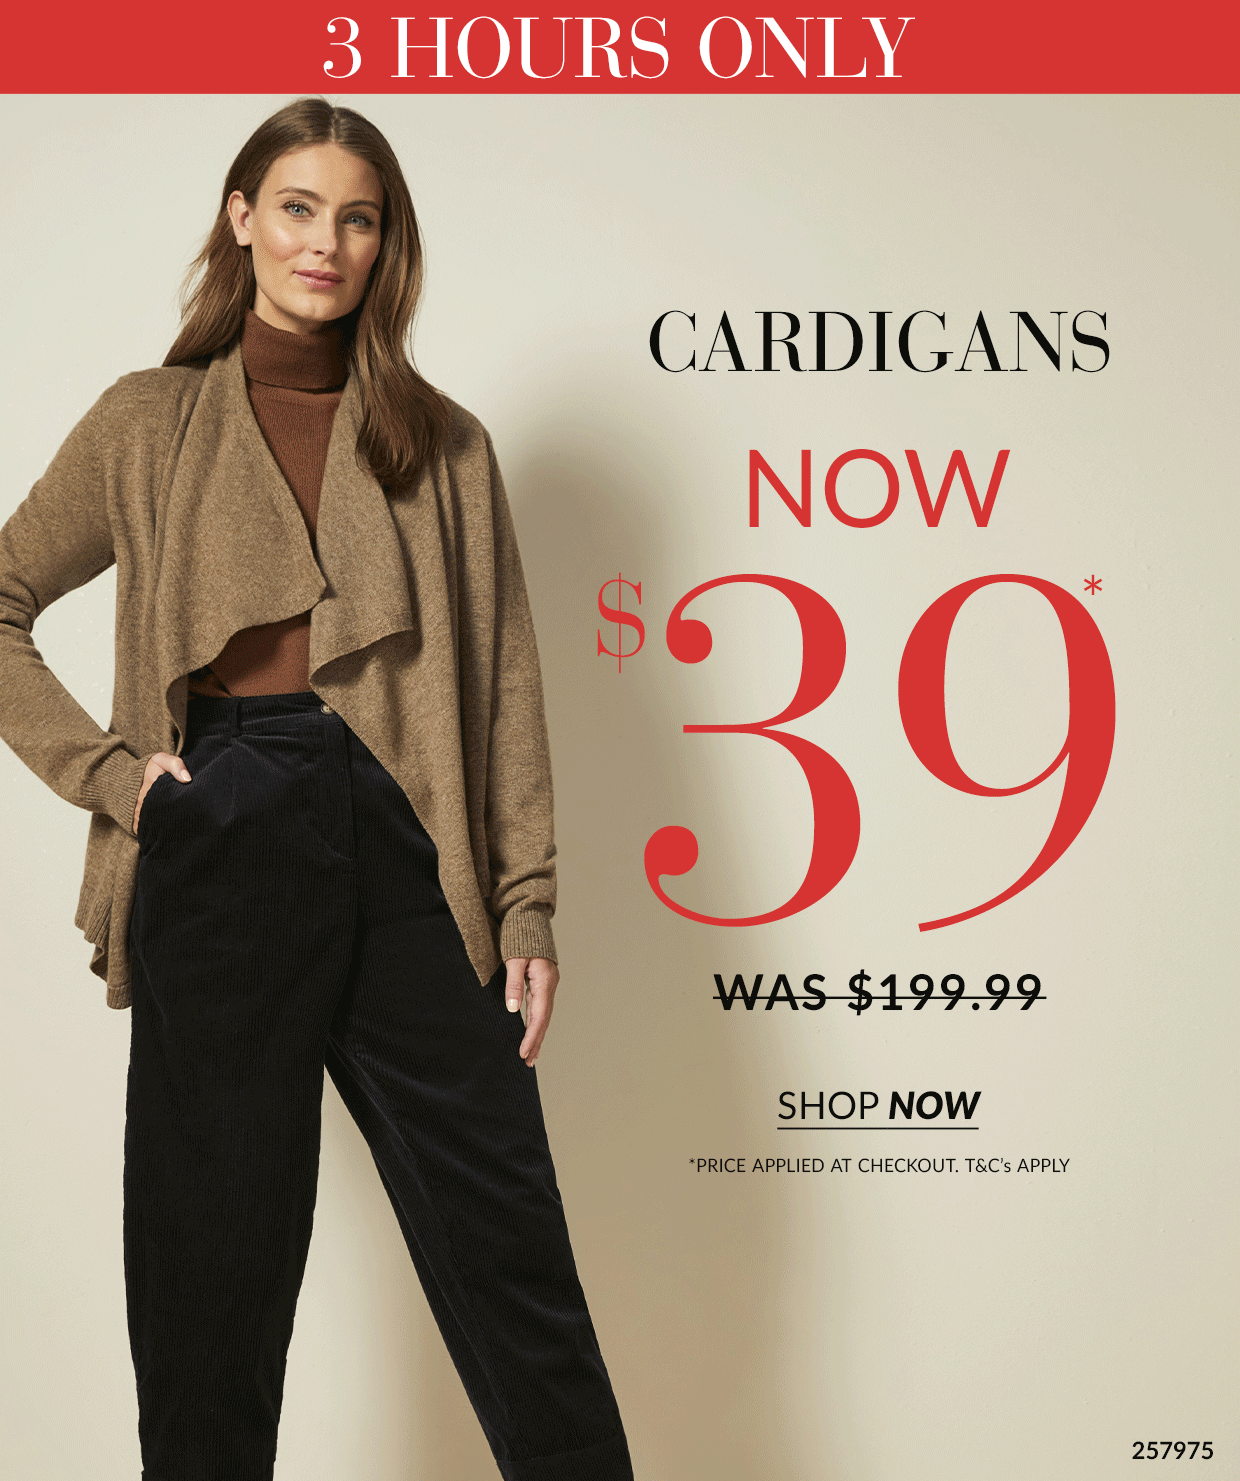 Cardigans NOW $39 UP TO 70% OFF 